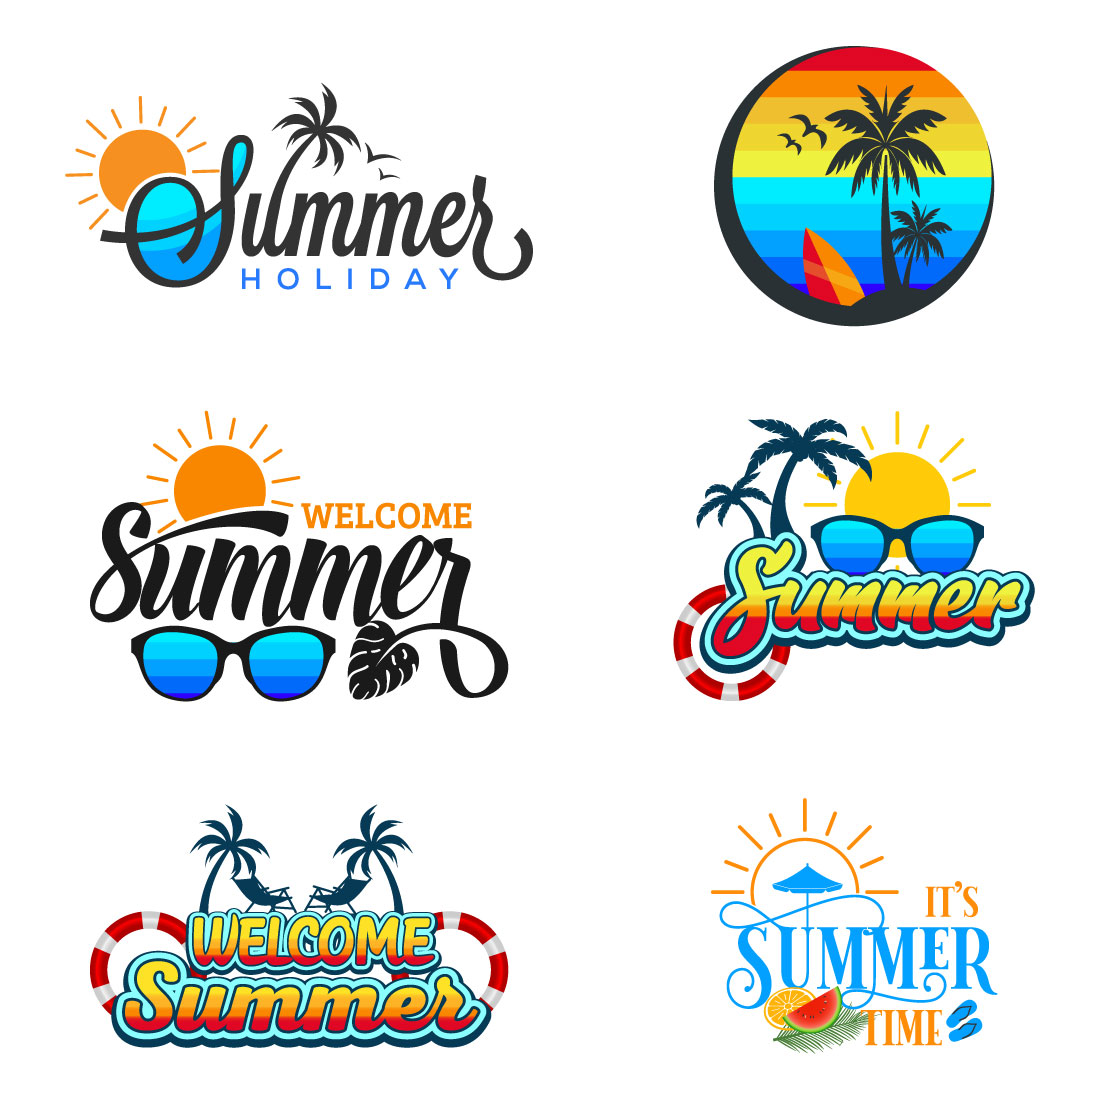 Summer holidays design concept vector illustration Tropical beach scene preview image.